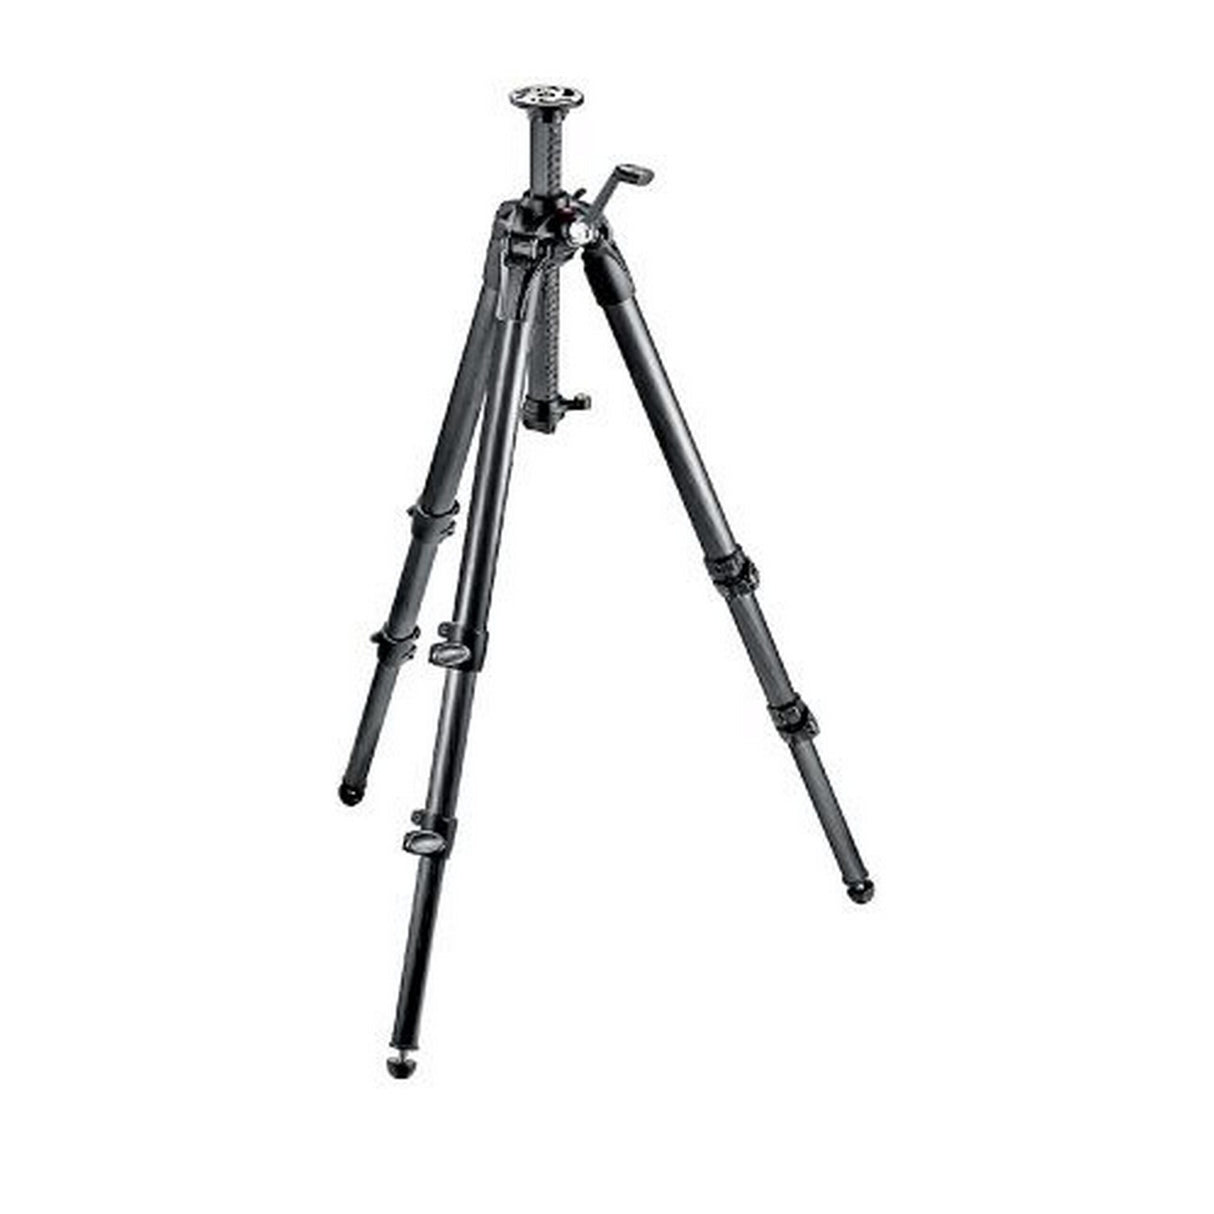 Manfrotto MT057C3-G 057 Carbon Fiber 3 Section Geared Tripod